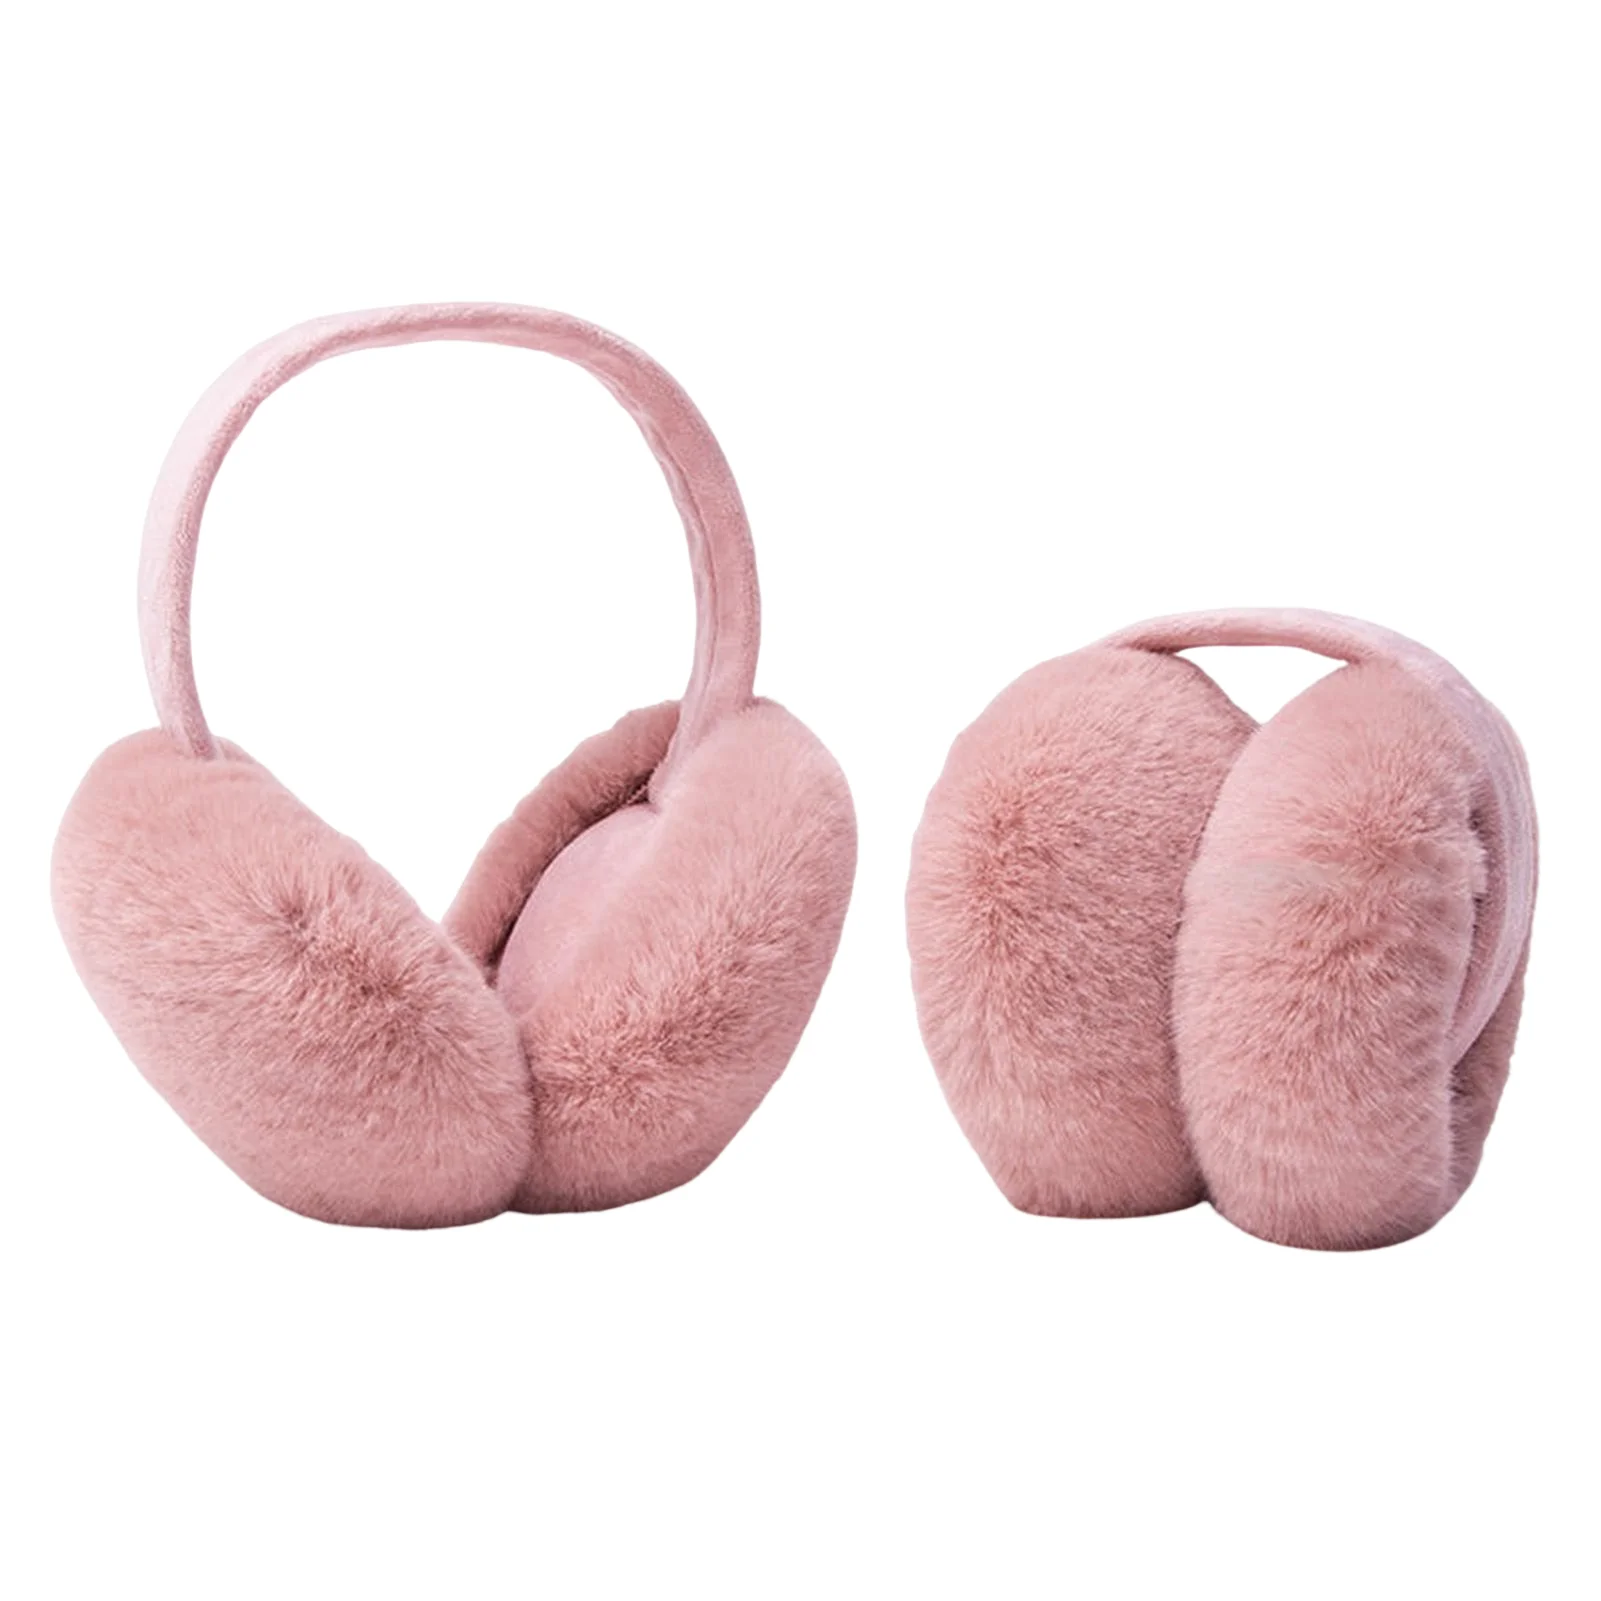 

Plush Earmuff for Girls Women with Soft And Smooth Touching Feeling Great Gift for Sister Wife Girlfriend